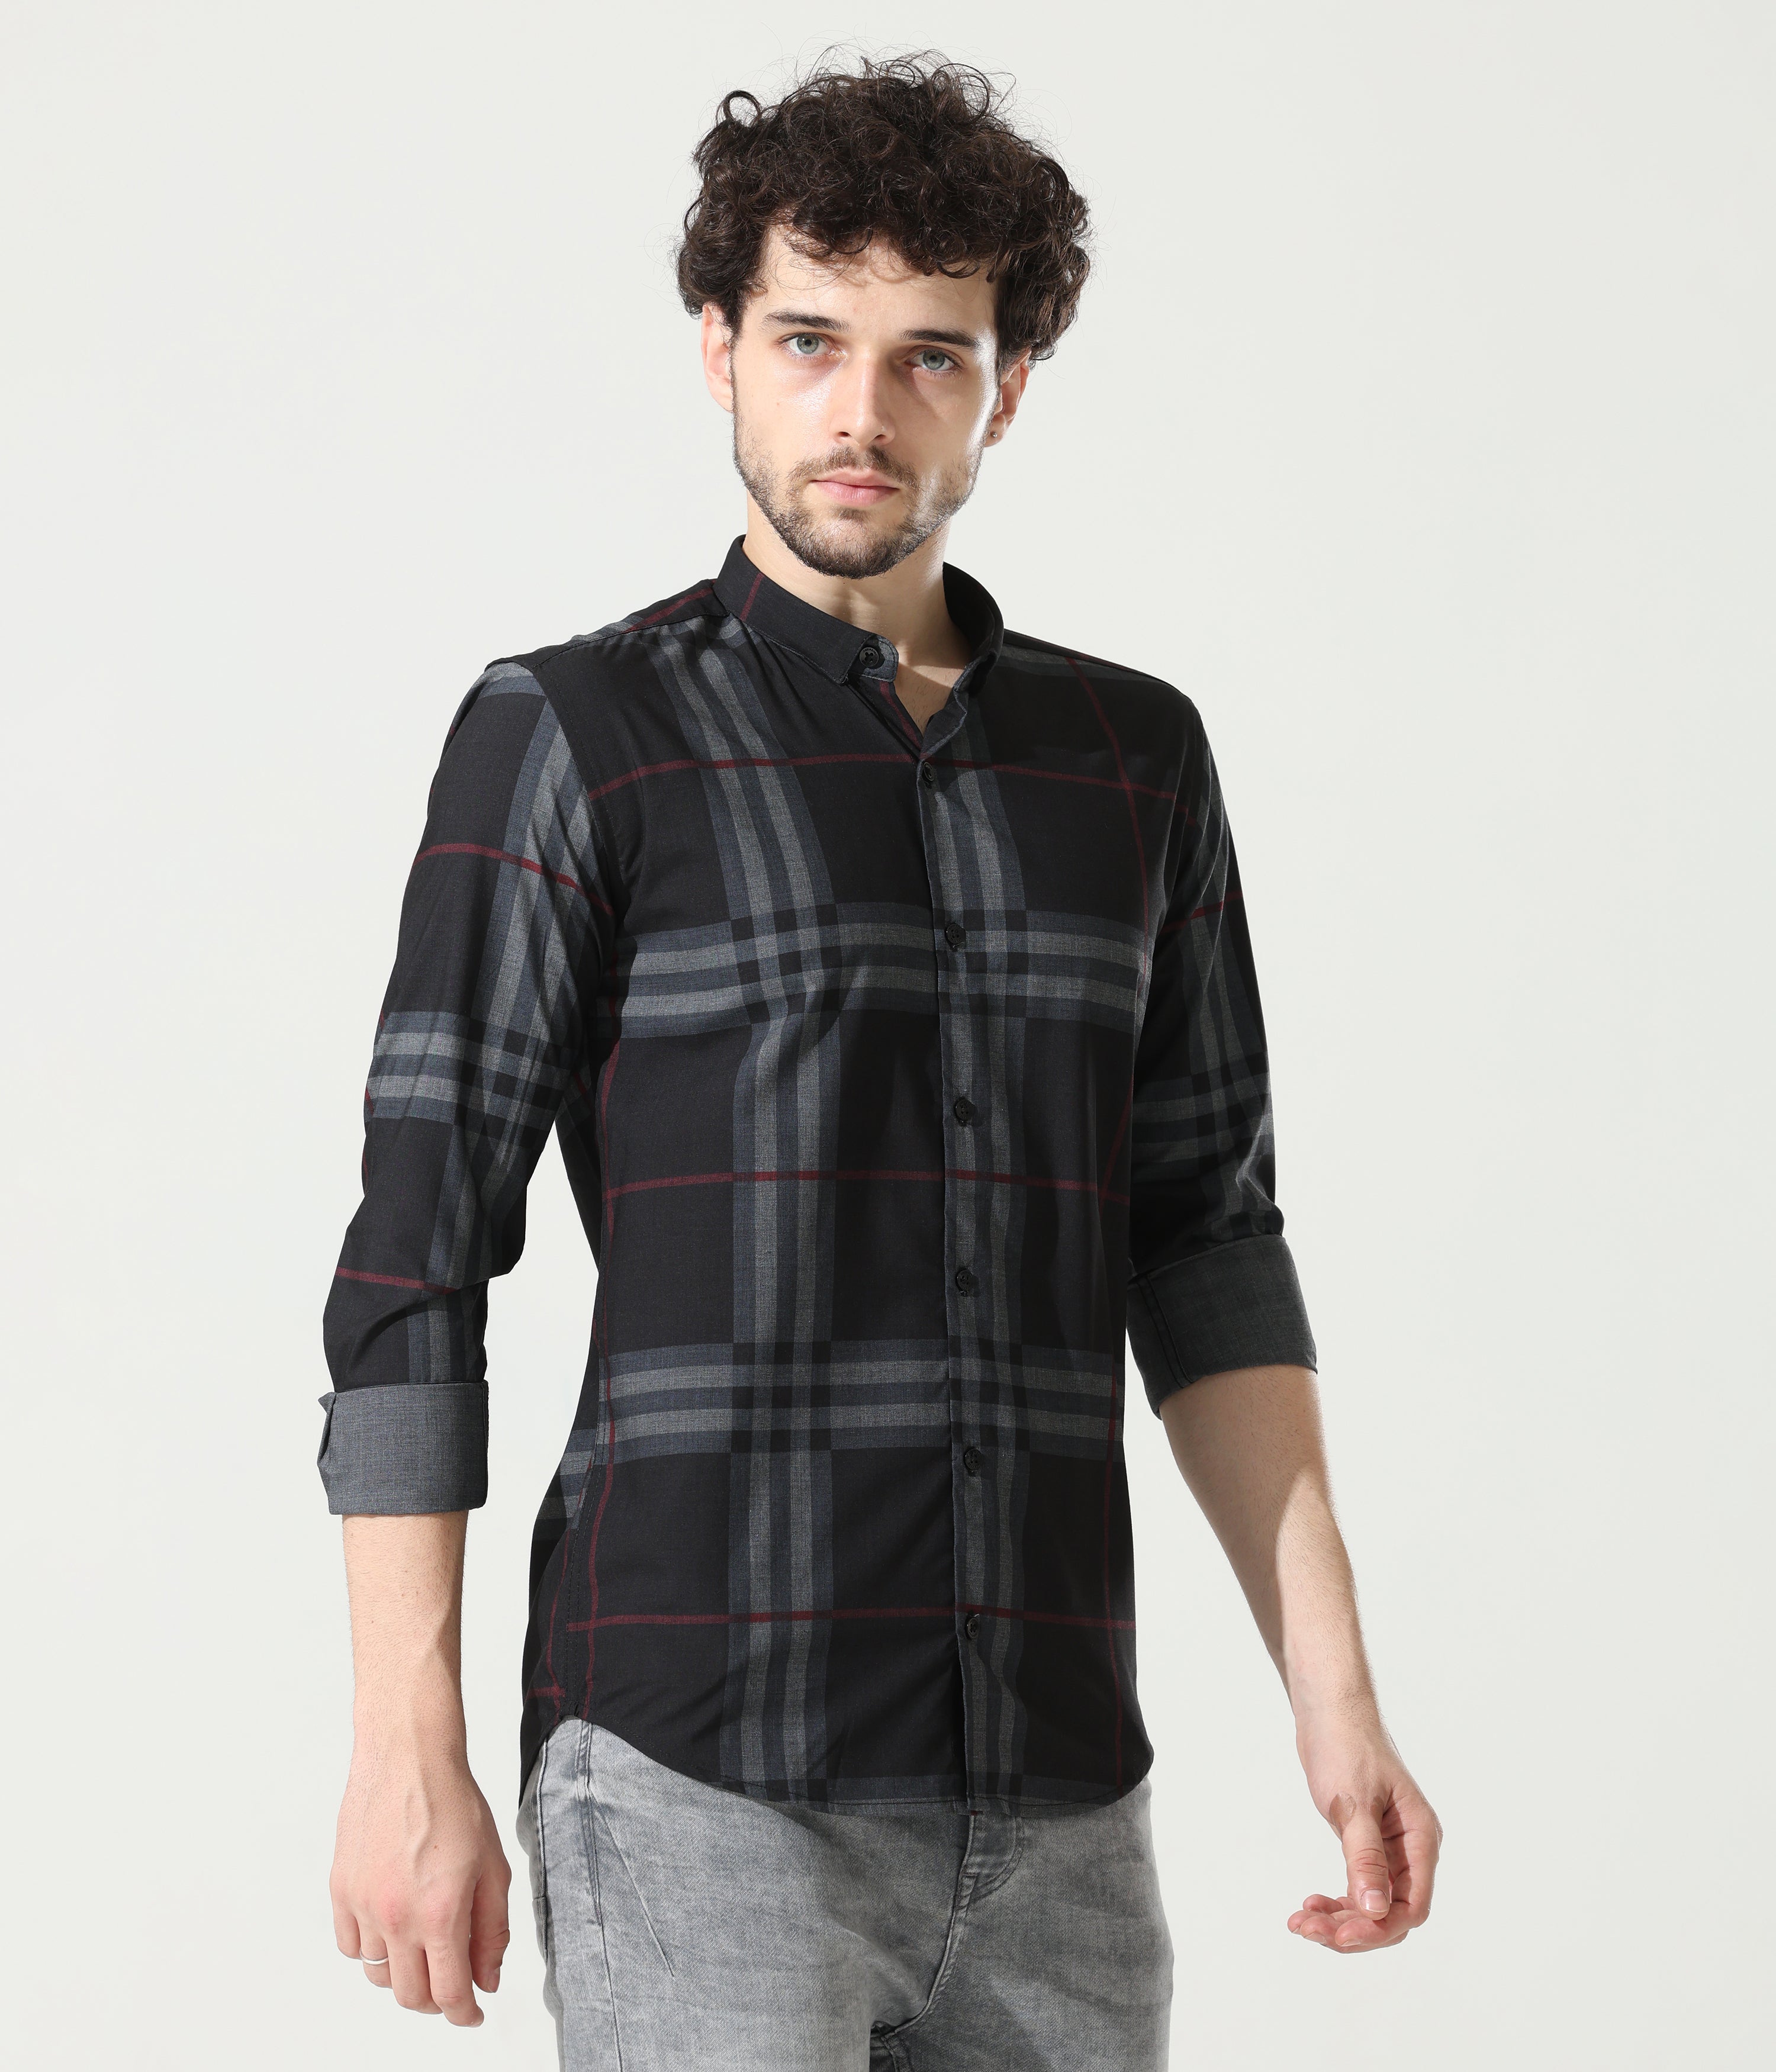 Black Shirt with Petite Red Stripes